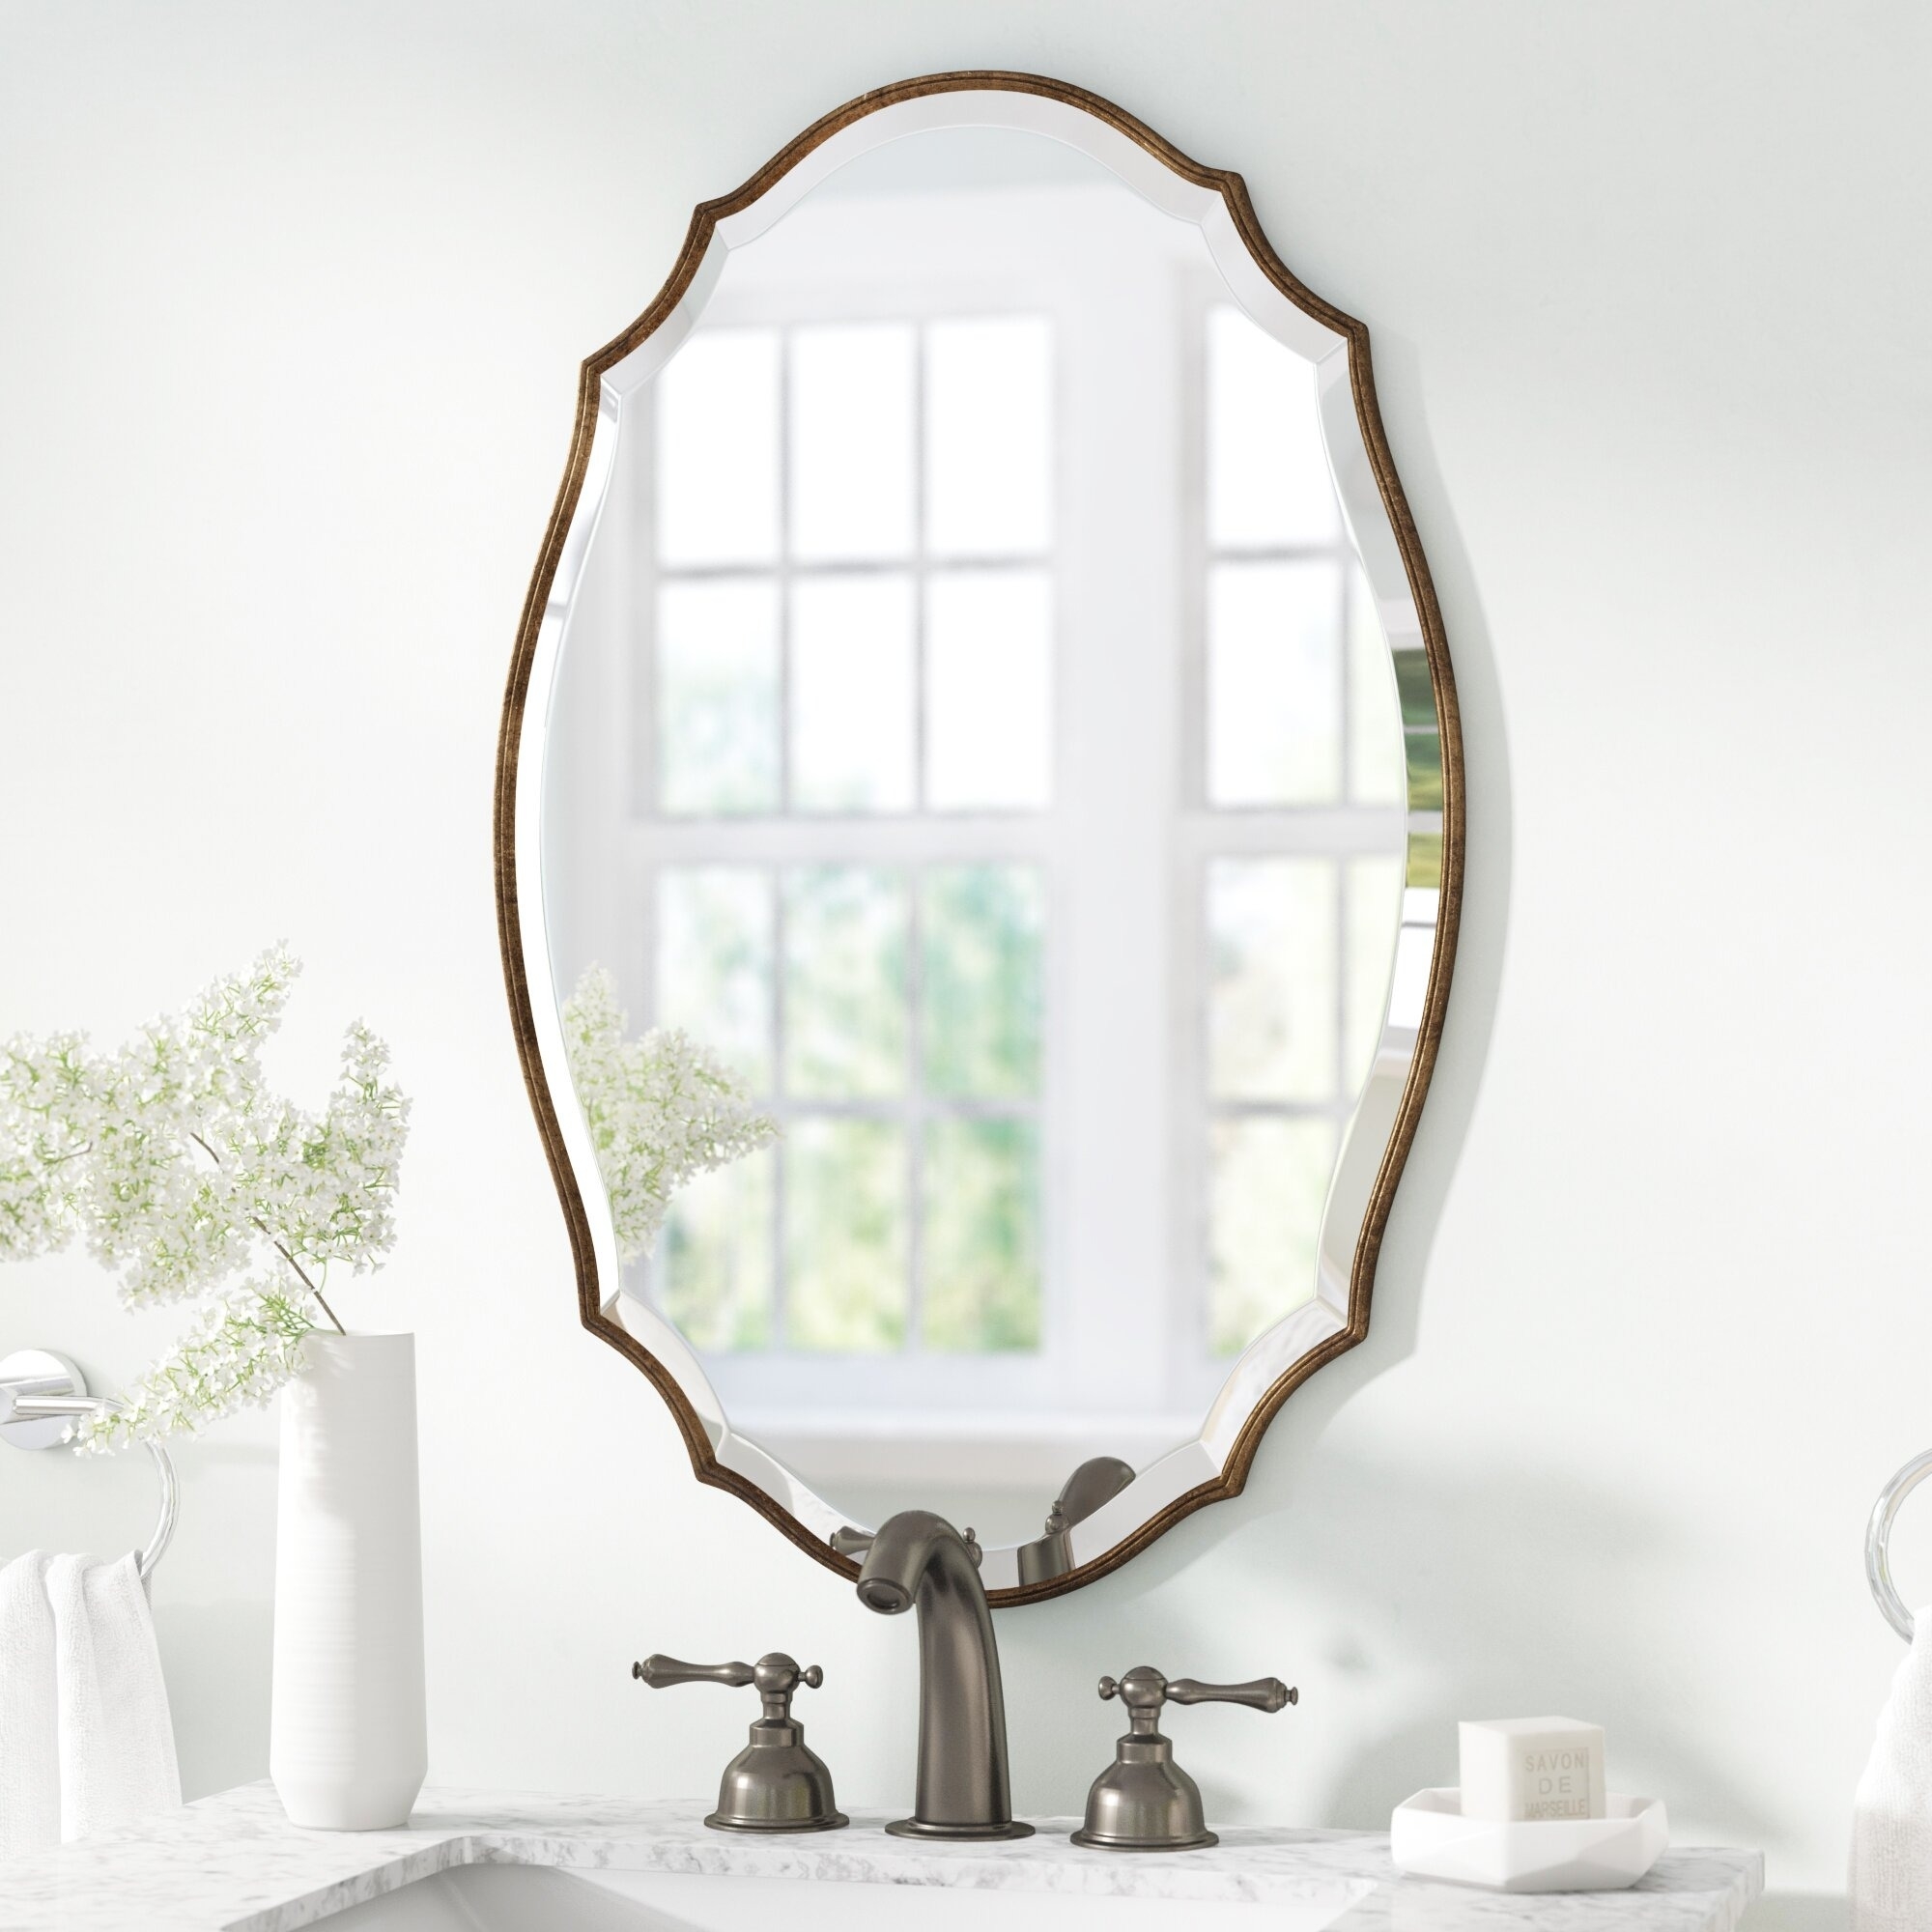 Elegant wall mirror with a unique frame design displayed above a bathroom sink